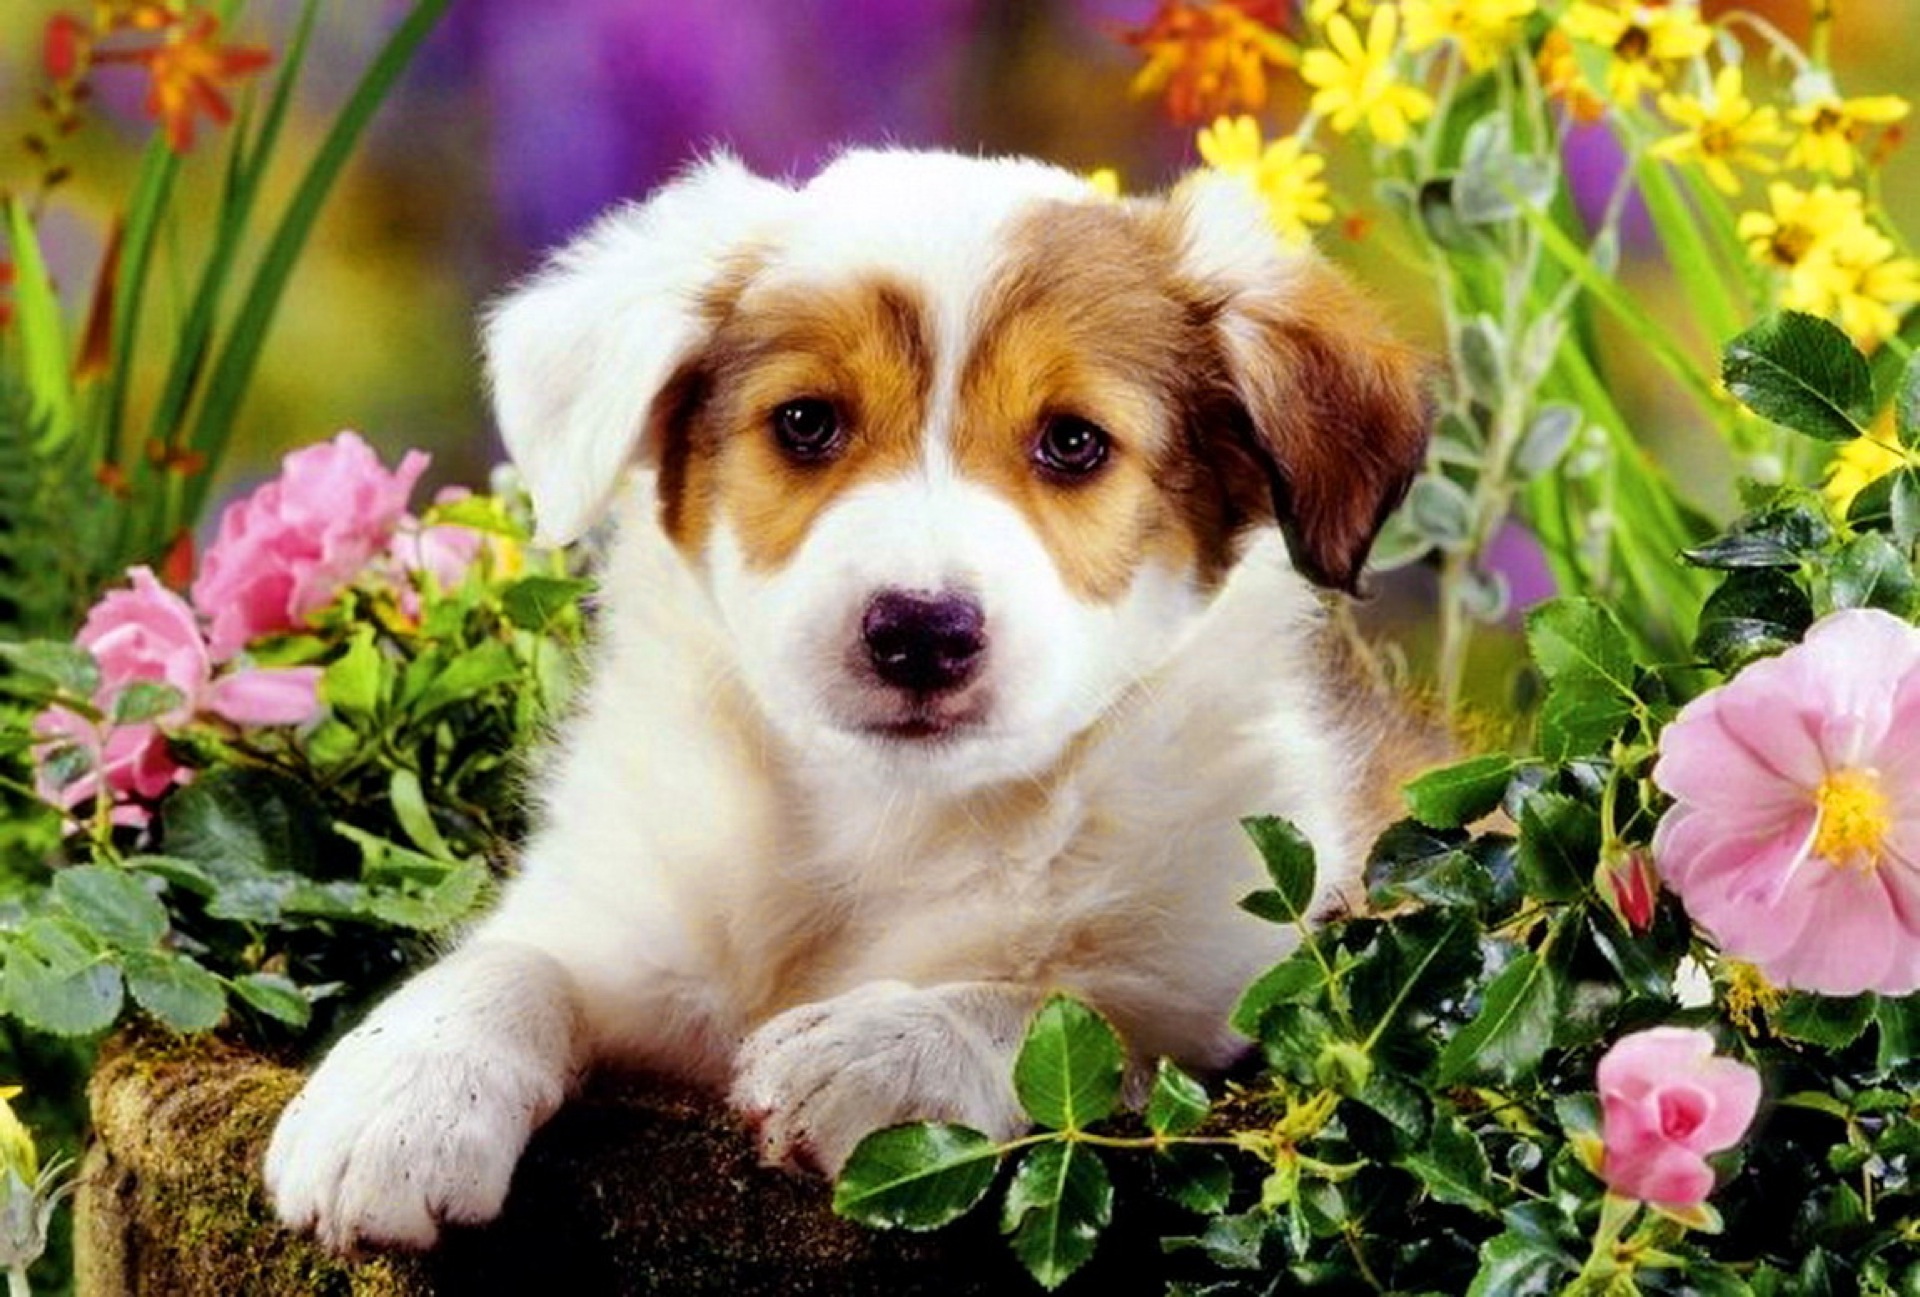 Cute Puppies In Spring Flowers Car Tuning